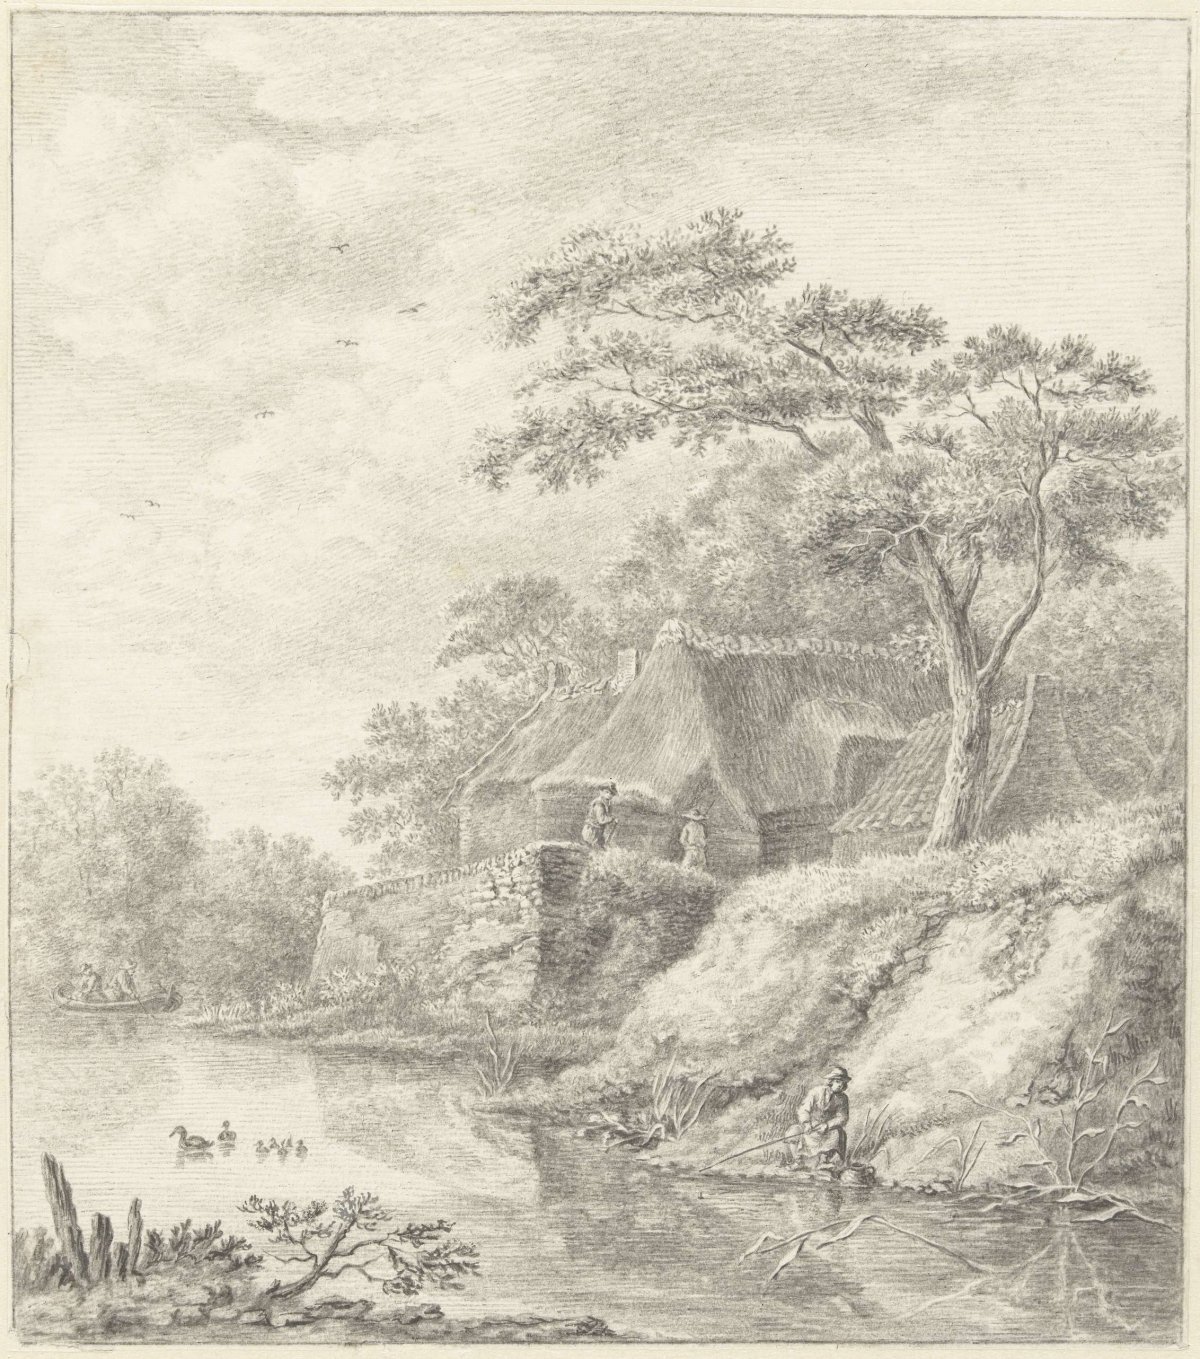 Oude stadswal, Abraham Delfos, 1741 - 1820